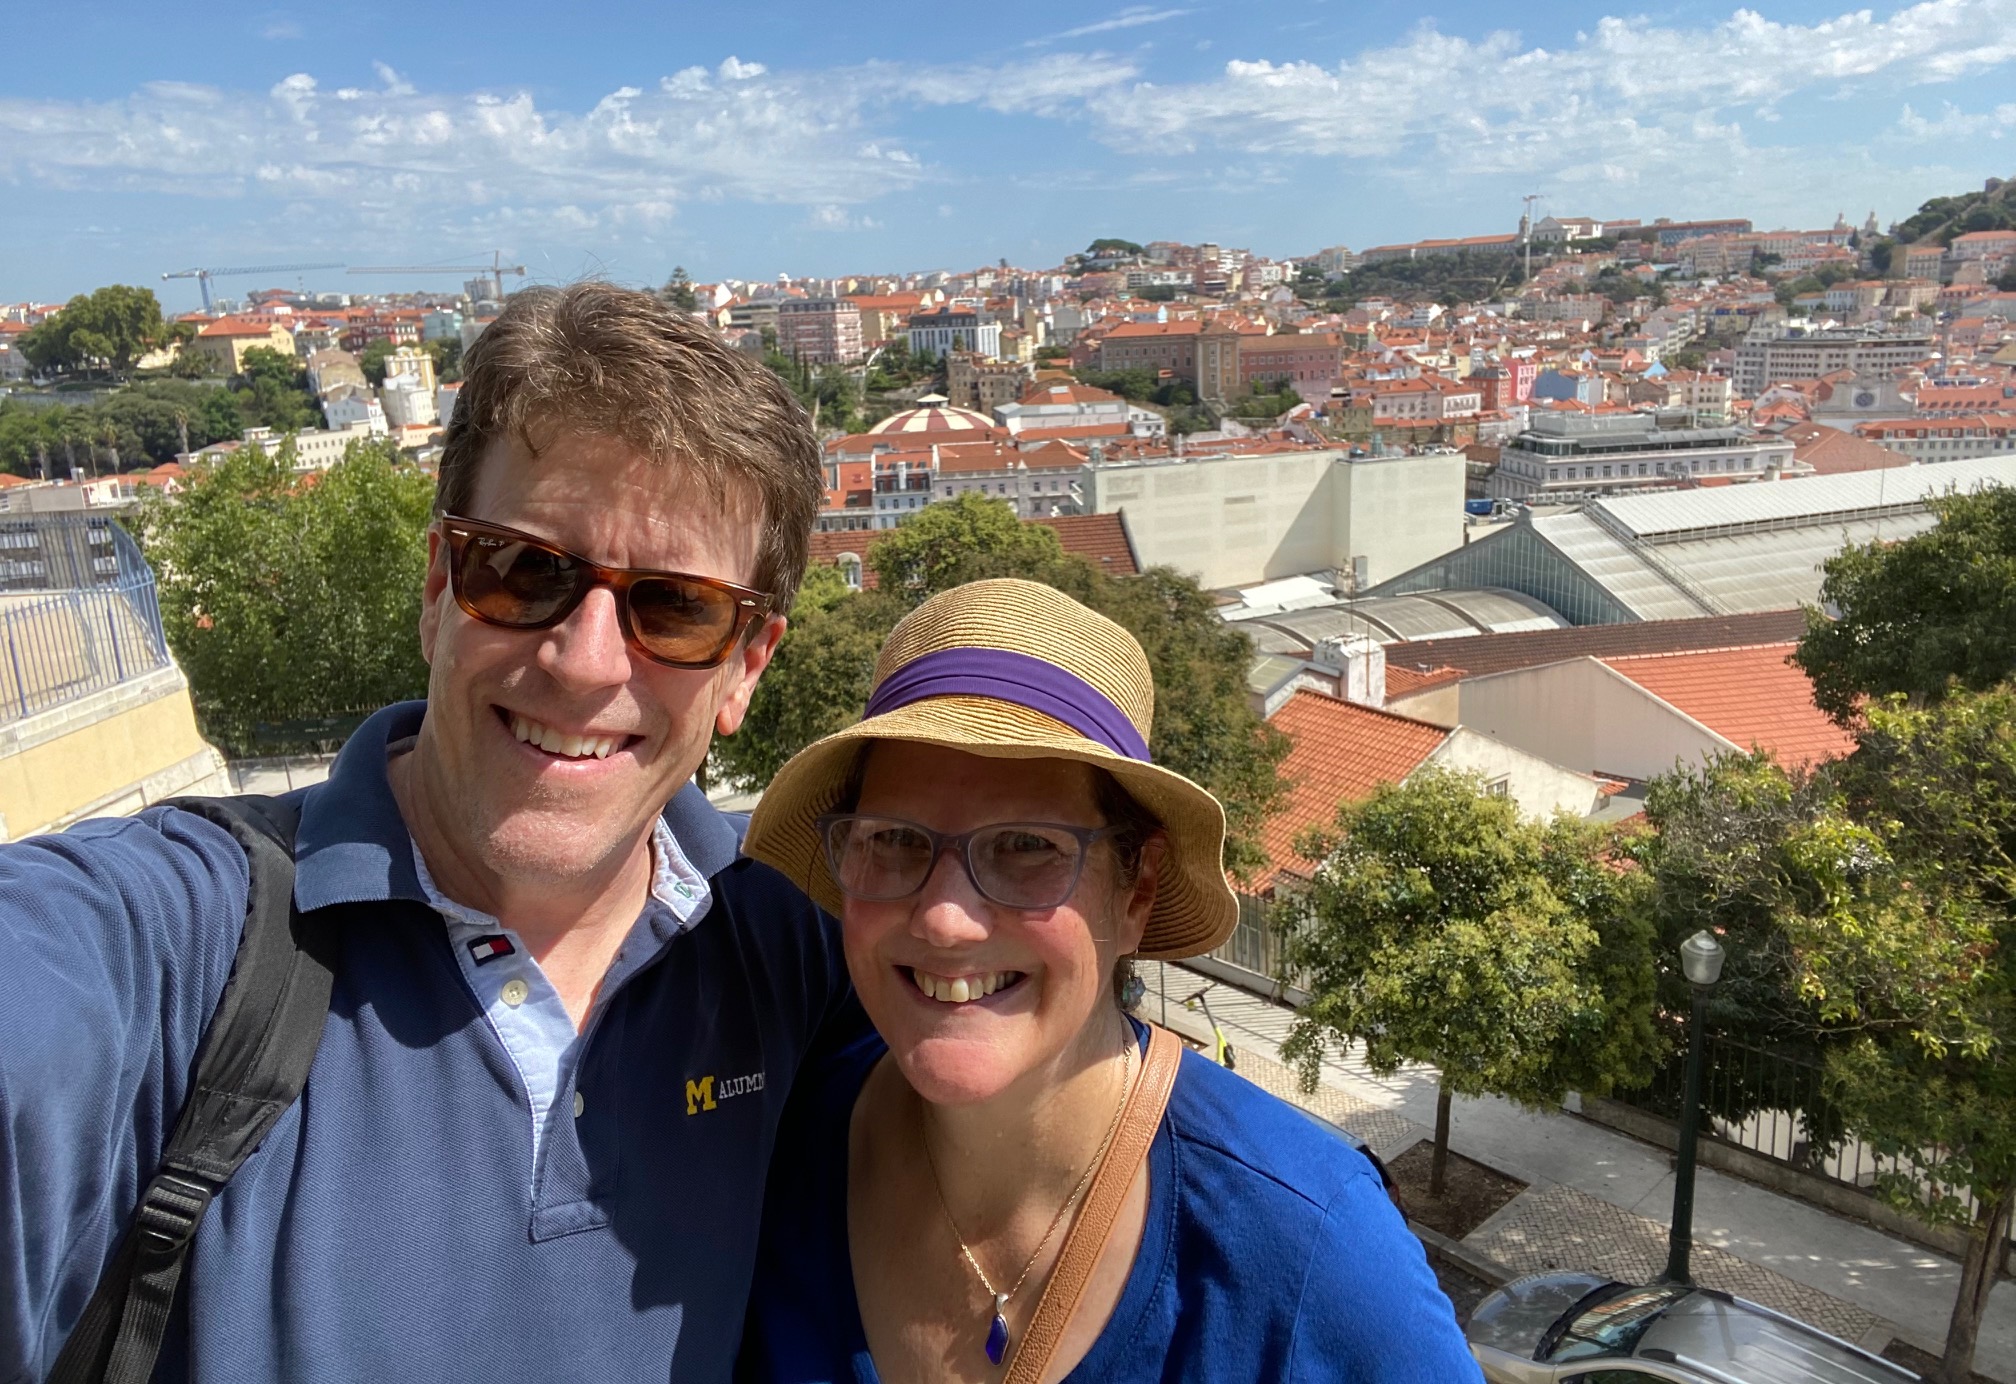 Tom Weeks, ’84, MBA’89, and his wife, Jean Wend, MSW’88, visited São Pedro de Alcântara Park in Portugal.